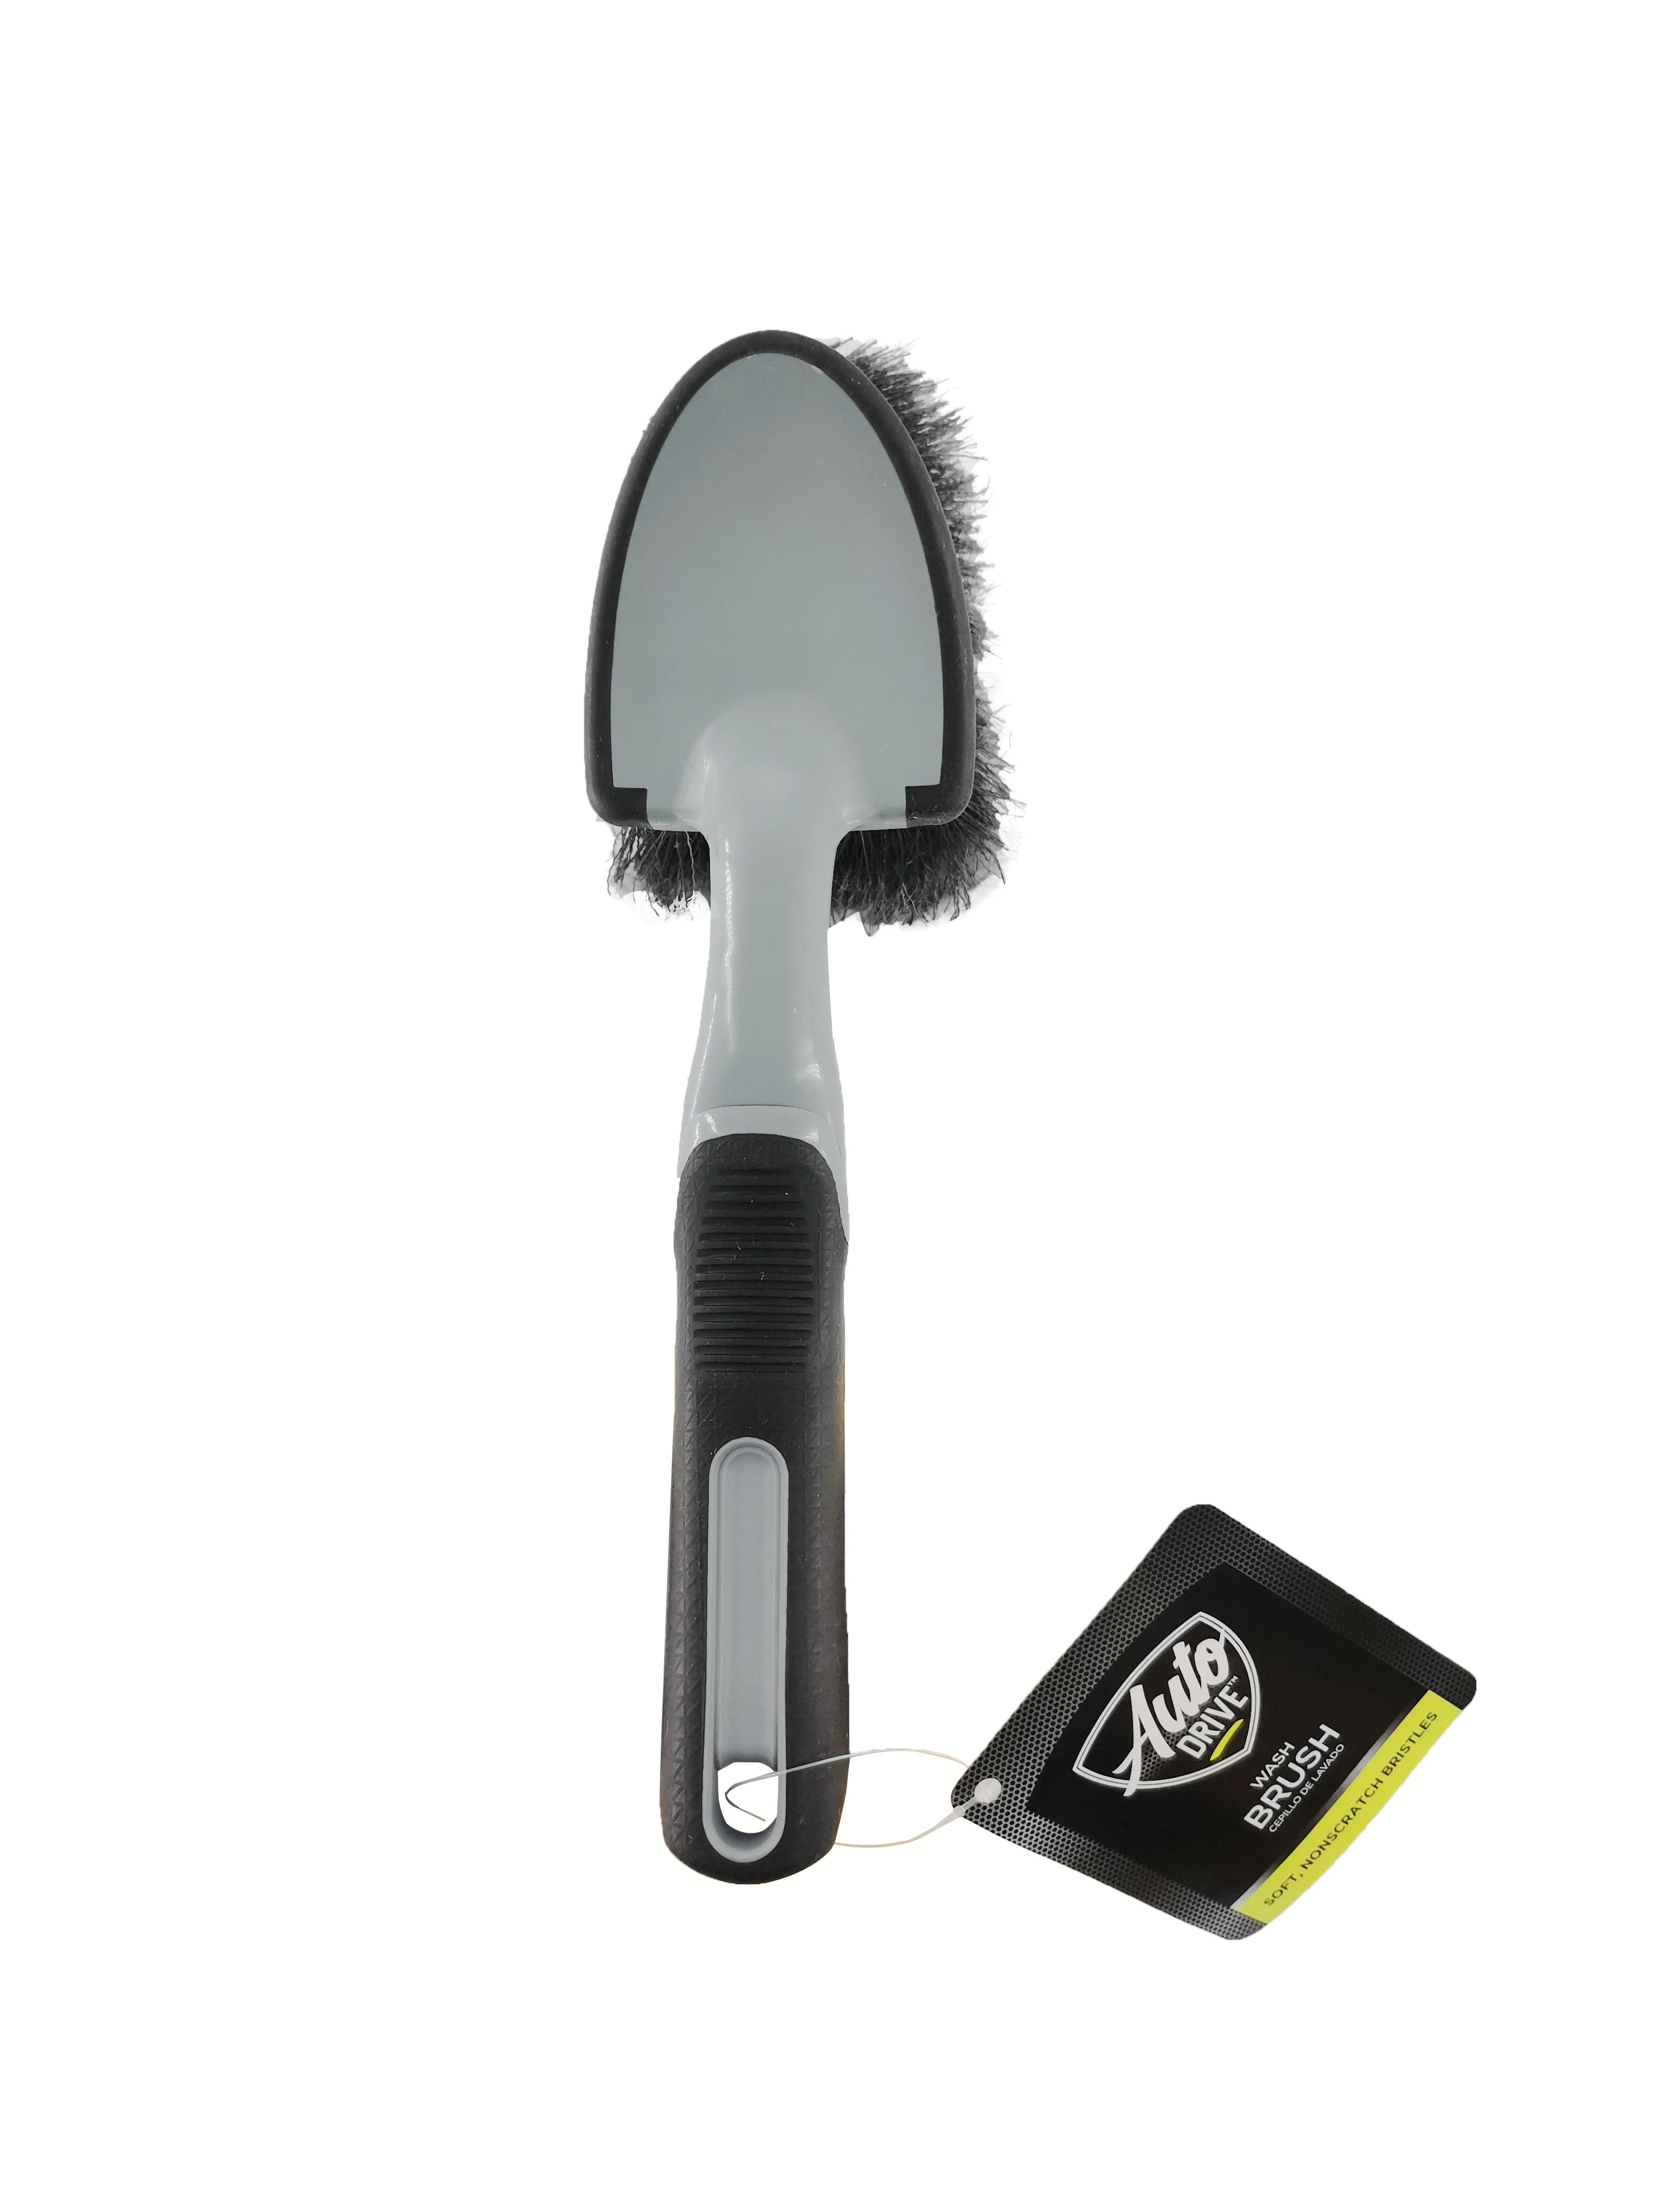 Wheel Well and Whitewall Cleaning Brush for Low-Profile Tires – Greenway's  Car Care Products